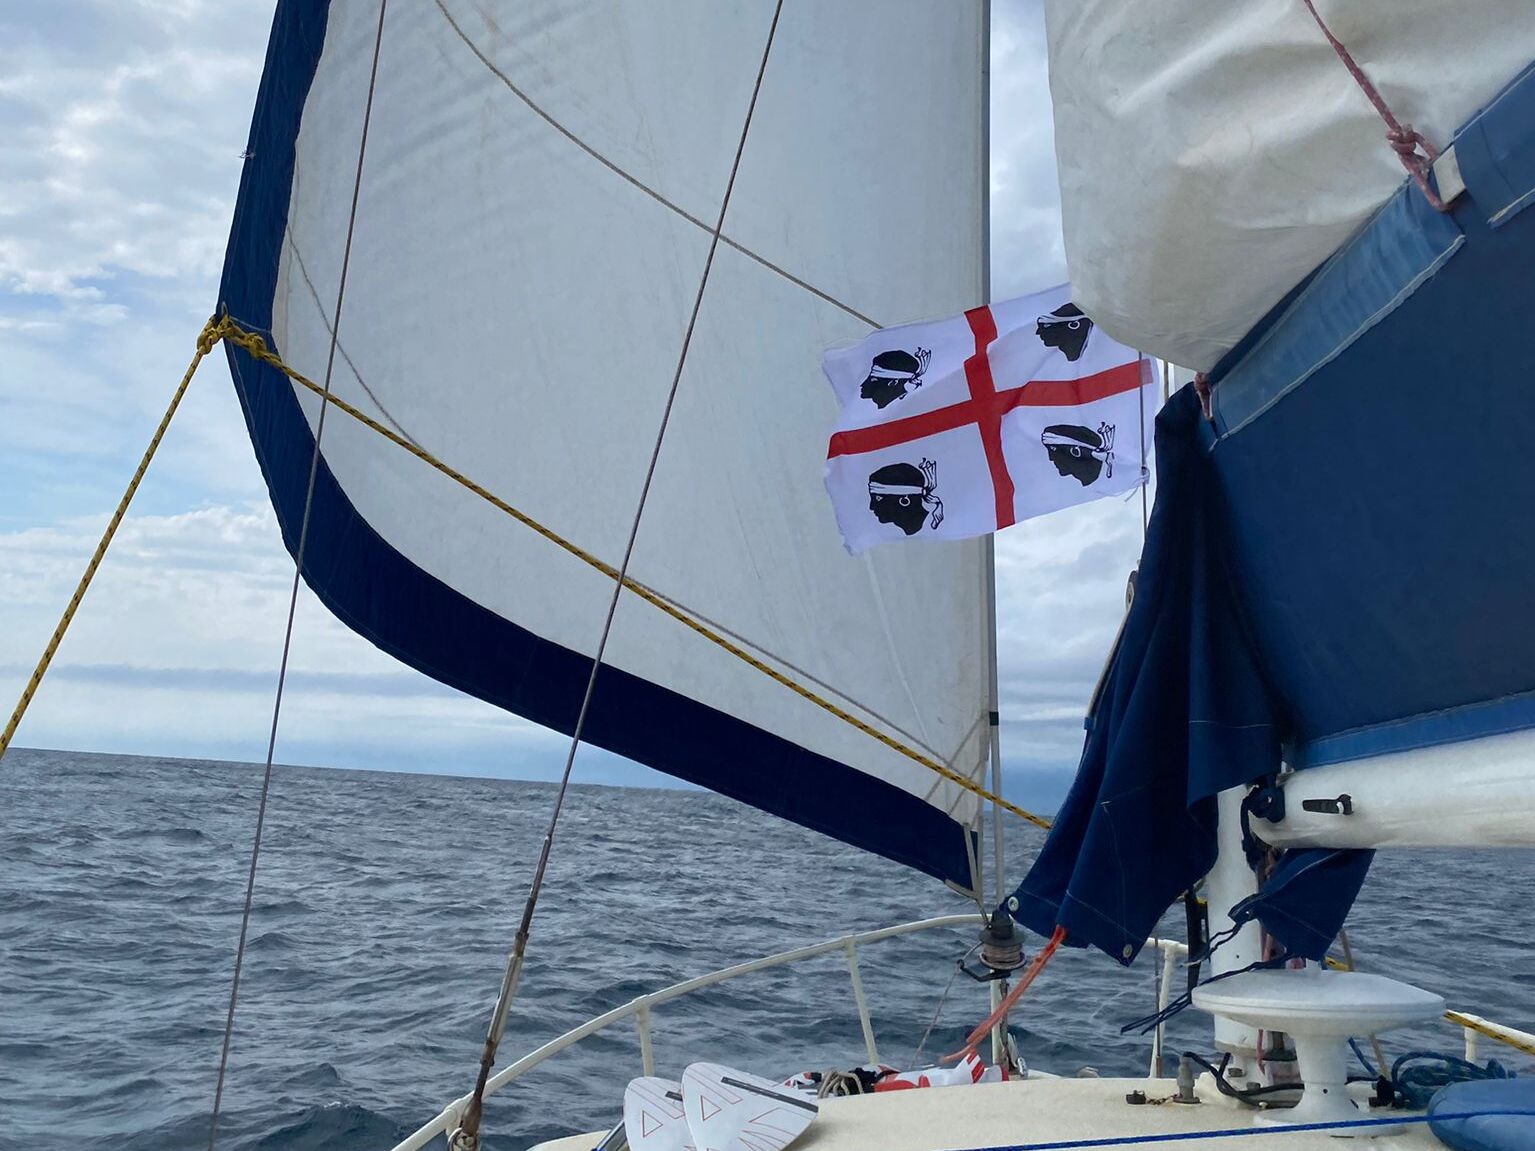 Sailing boat with the flag of Sardinia